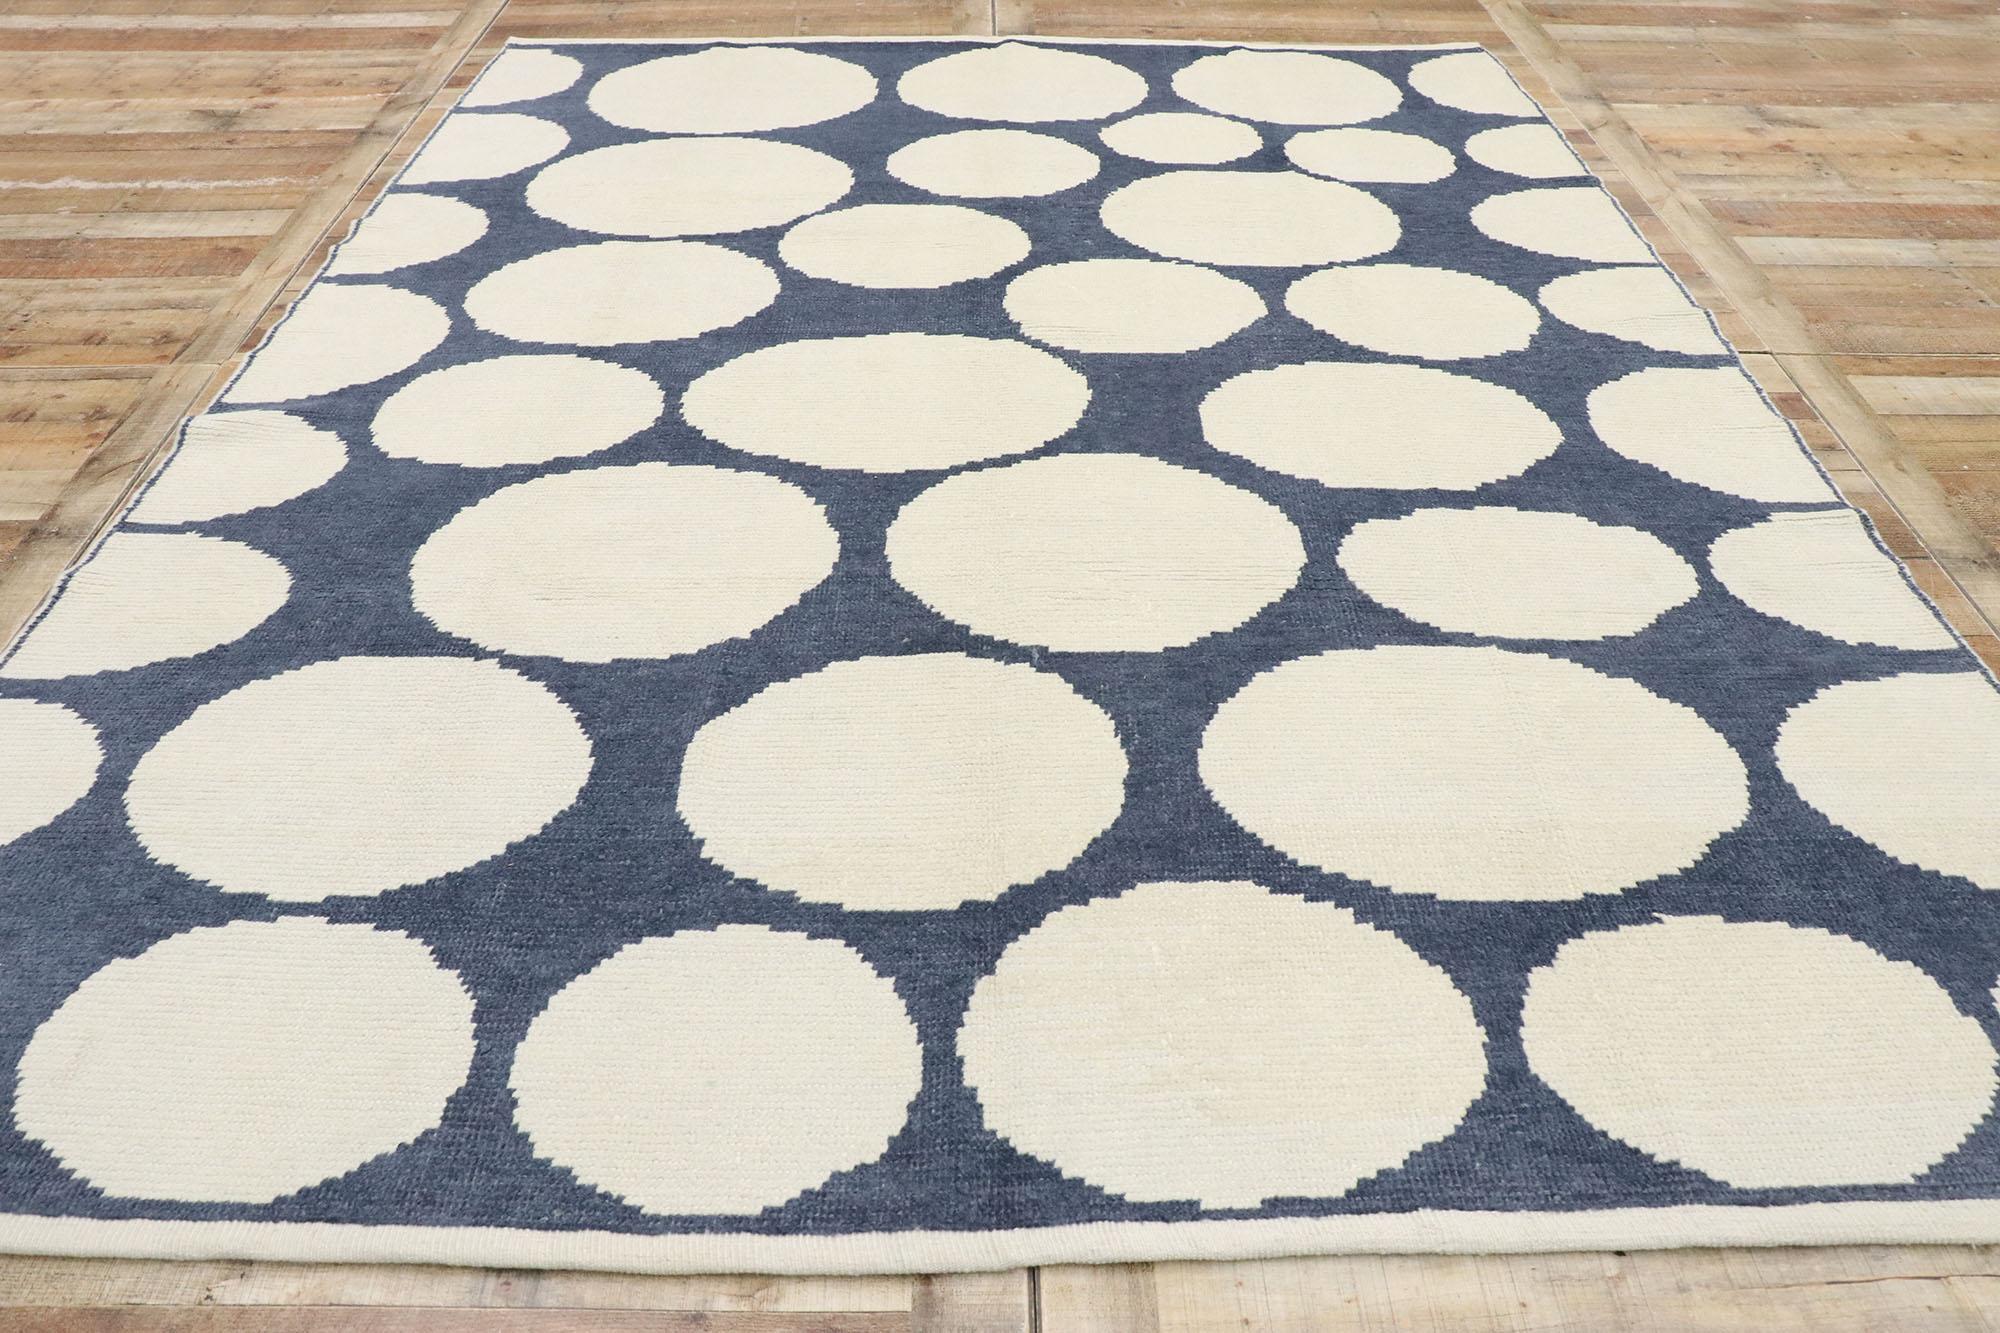 Turkish New Contemporary Moroccan Polka Dot Orphism Style Rug Inspired by Yayoi Kusama